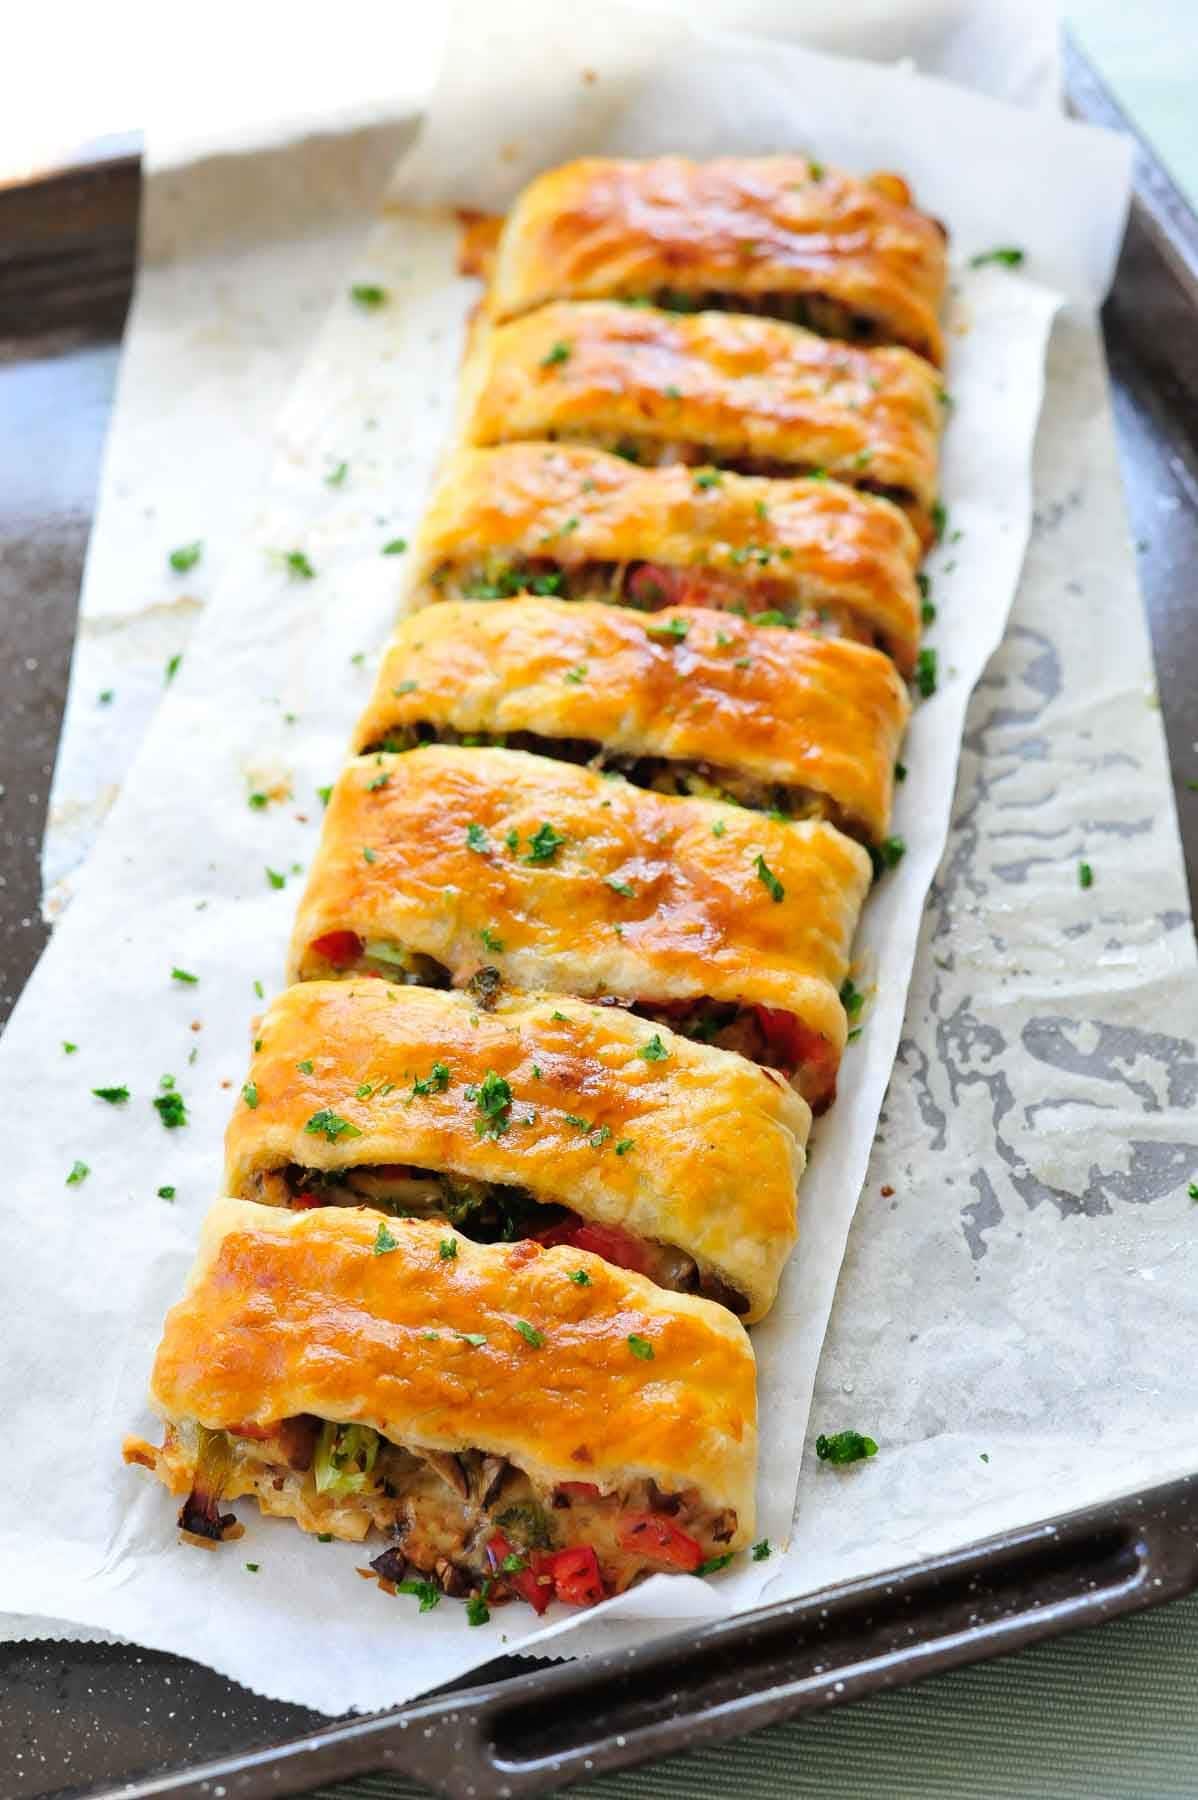 Puff pastry strudel with vegetables and cheese on a baking sheet.